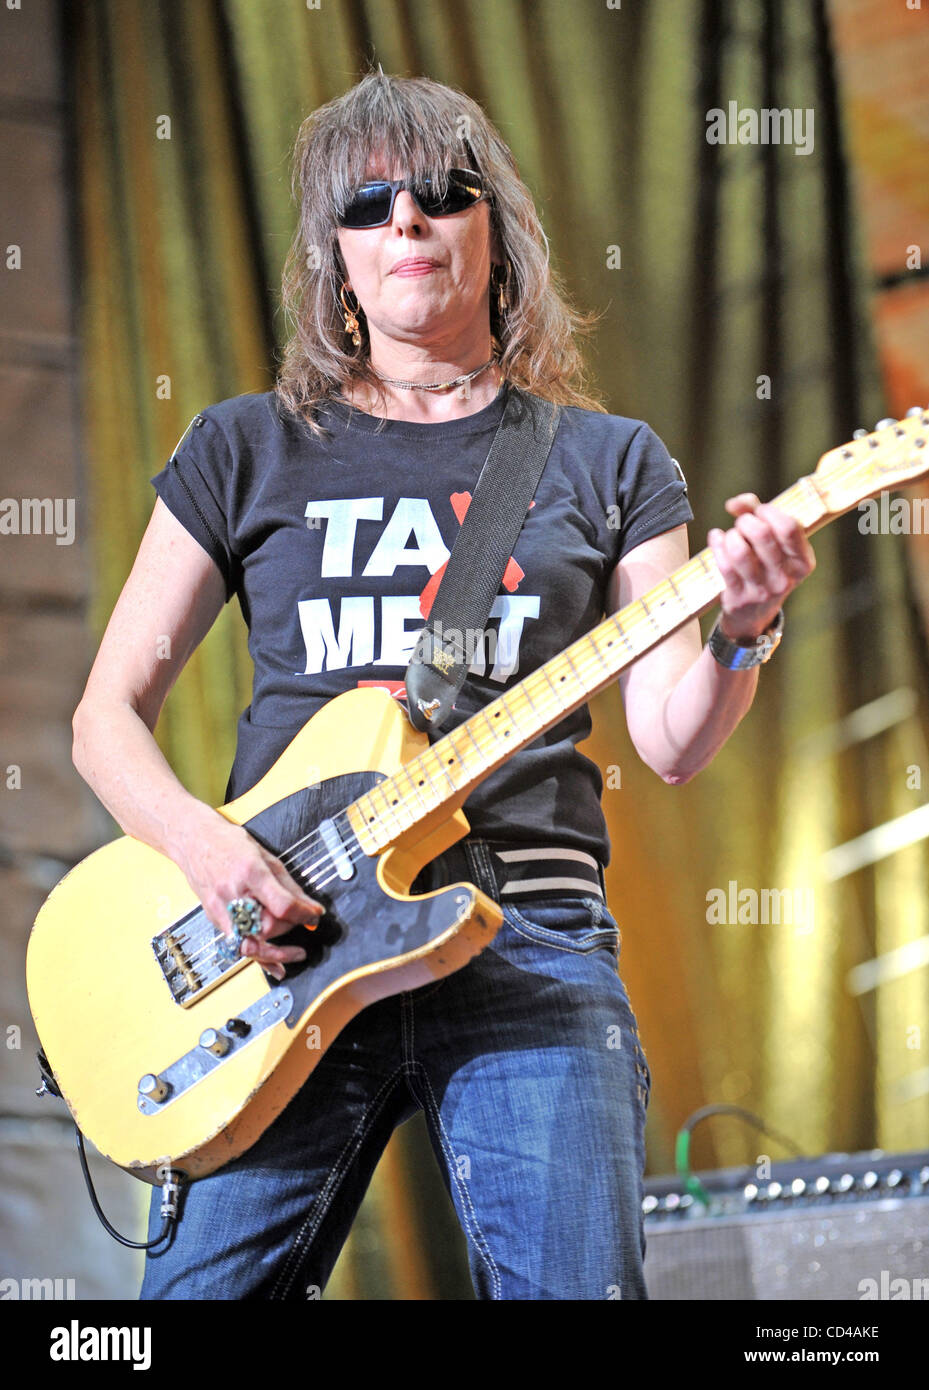 Sep 20, 2008 - Mansfield, Massachusetts; USA - Singer / Guitarist CHRISSIE HYNDE of the band The Pretenders performs live as part of the 2008 Farm Aid benefit concert that took place to a sold out audience at the Comcast Center located in Massachusetts. Copyright 2008 Jason Moore. Mandatory Credit:  Stock Photo